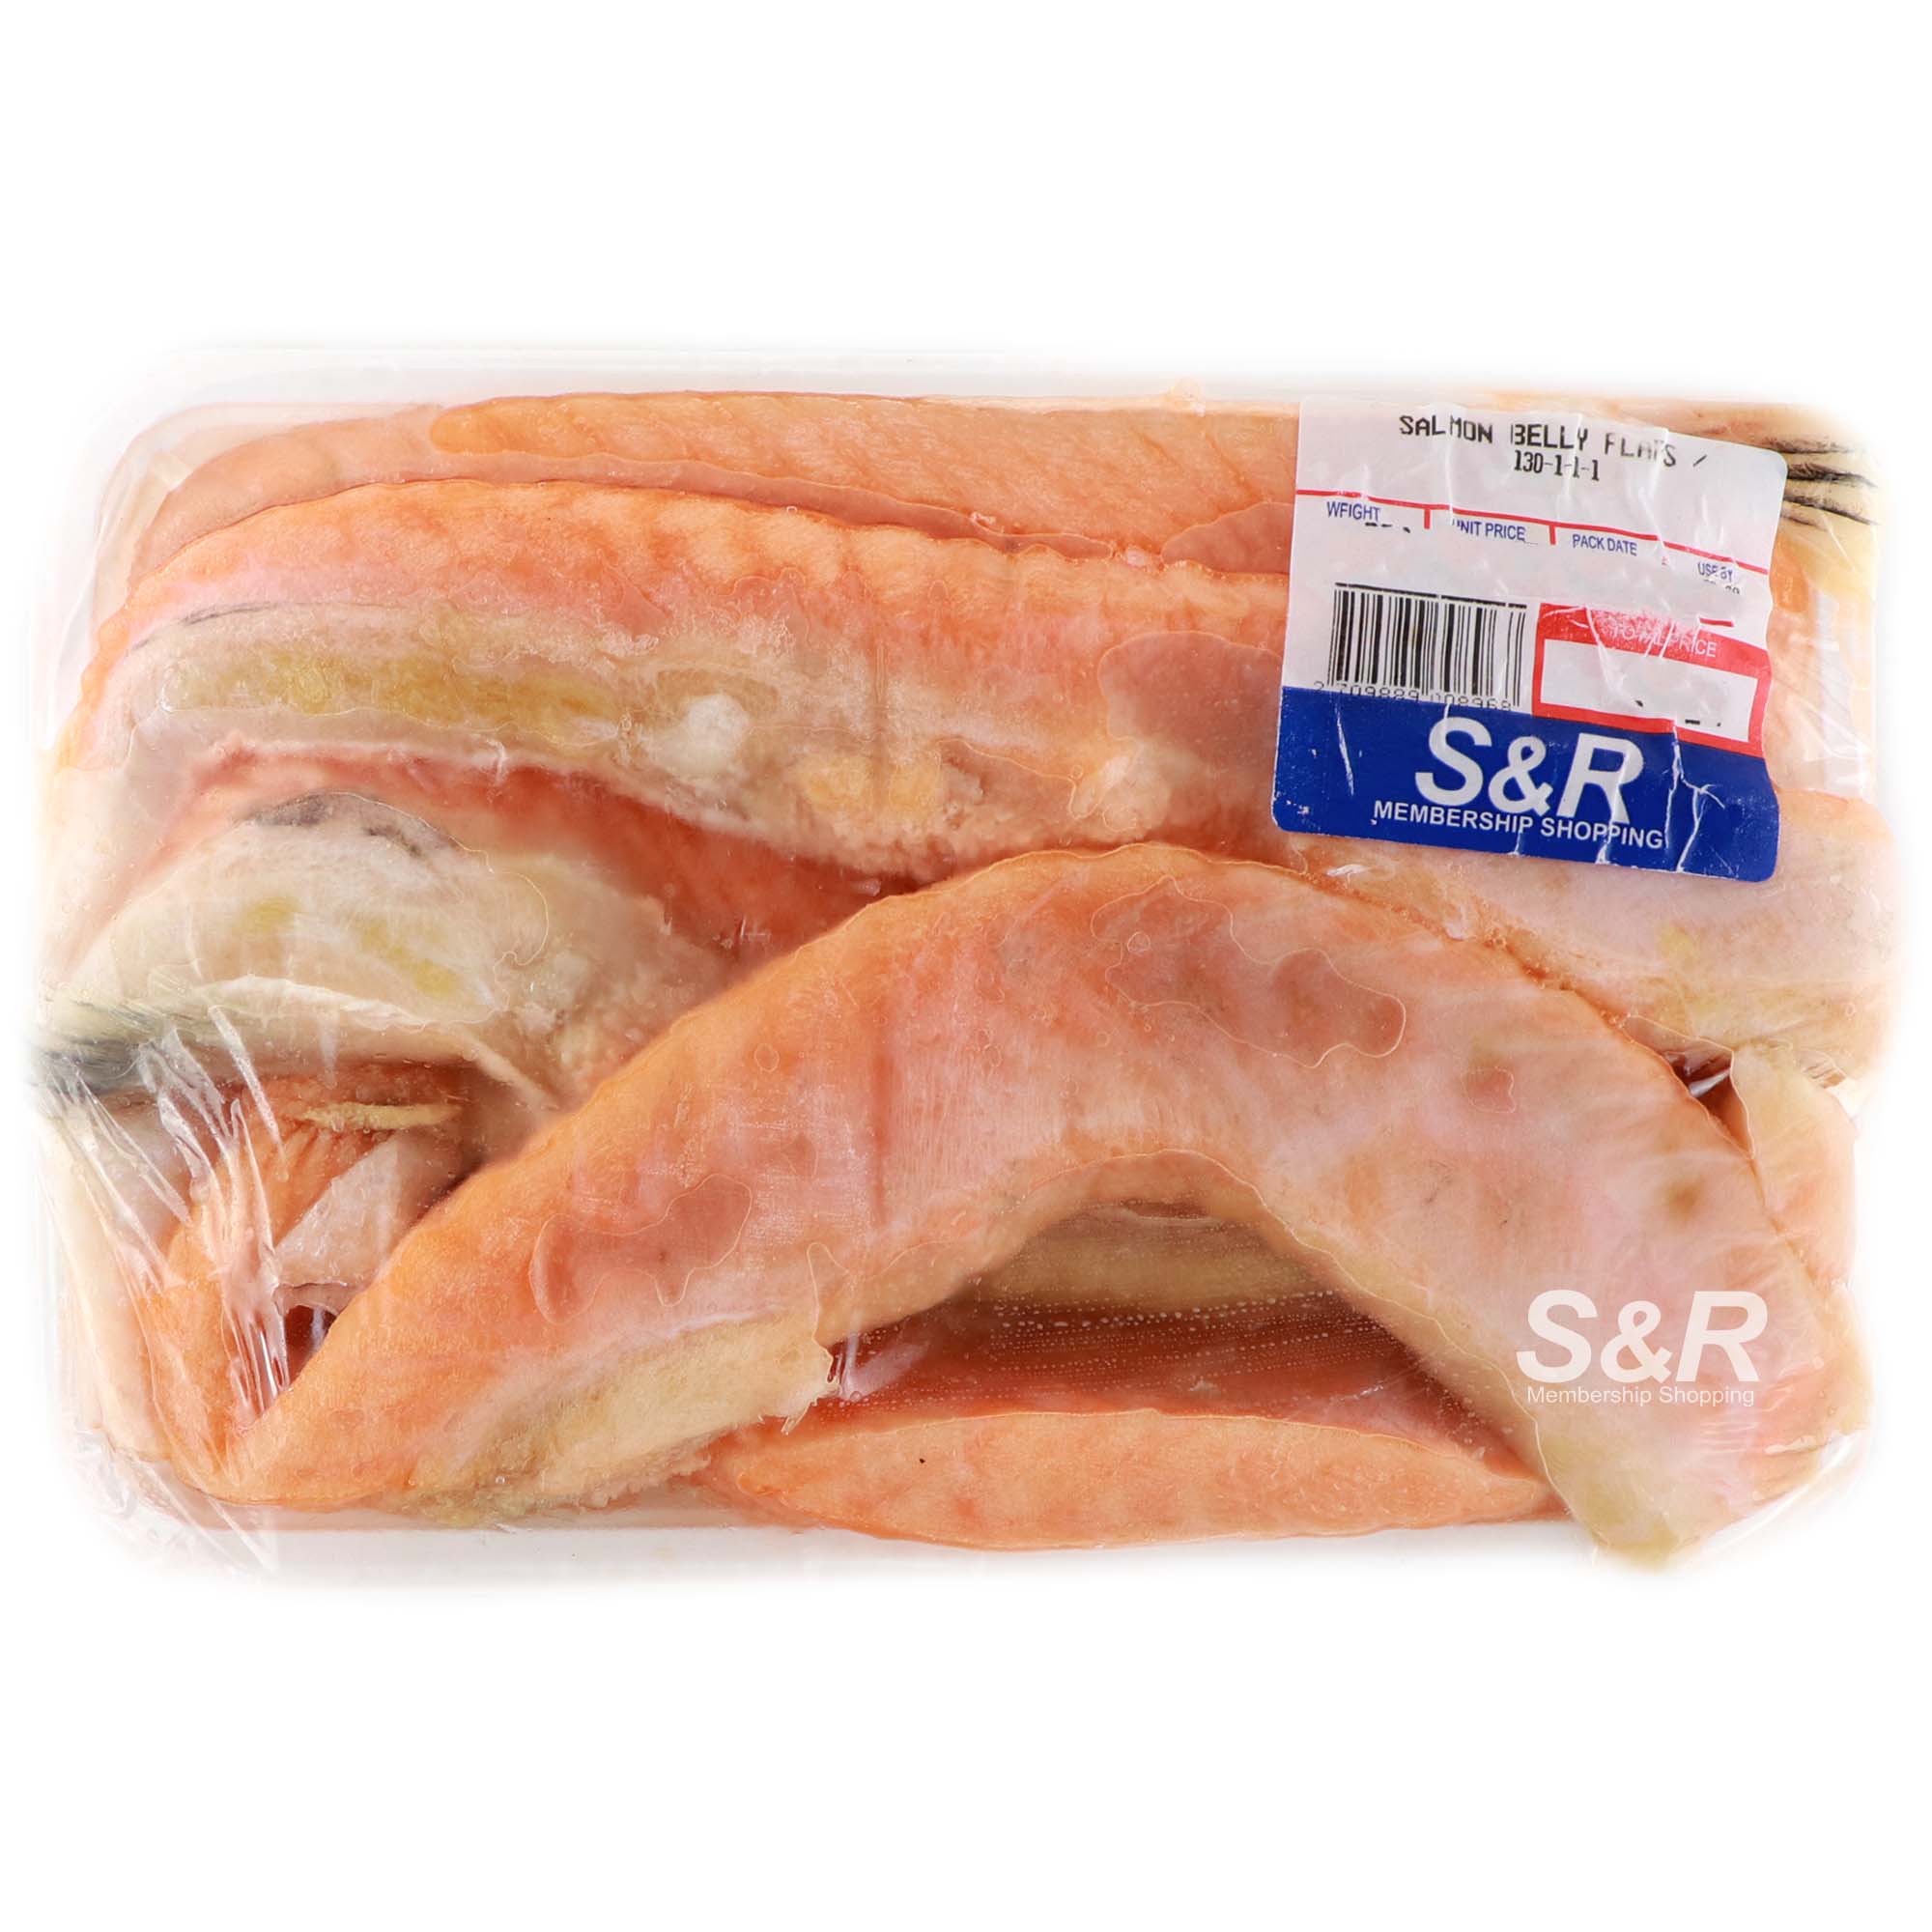 S&R Salmon Belly Flaps approx. 1.3kg